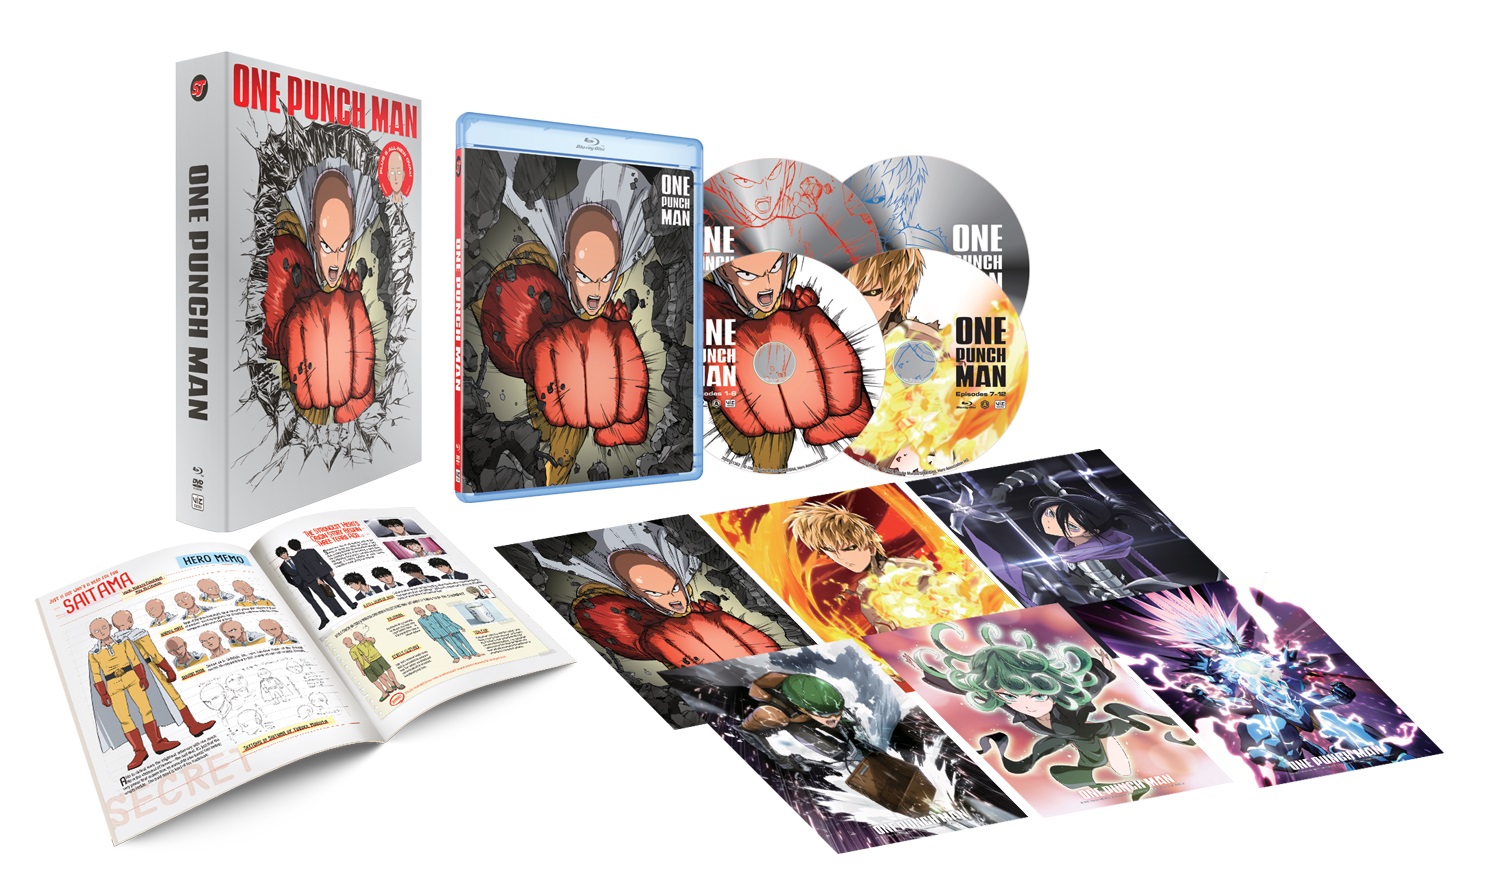 One-Punch Man Season 1 Limited Edition Blu-ray/DVD image count 1